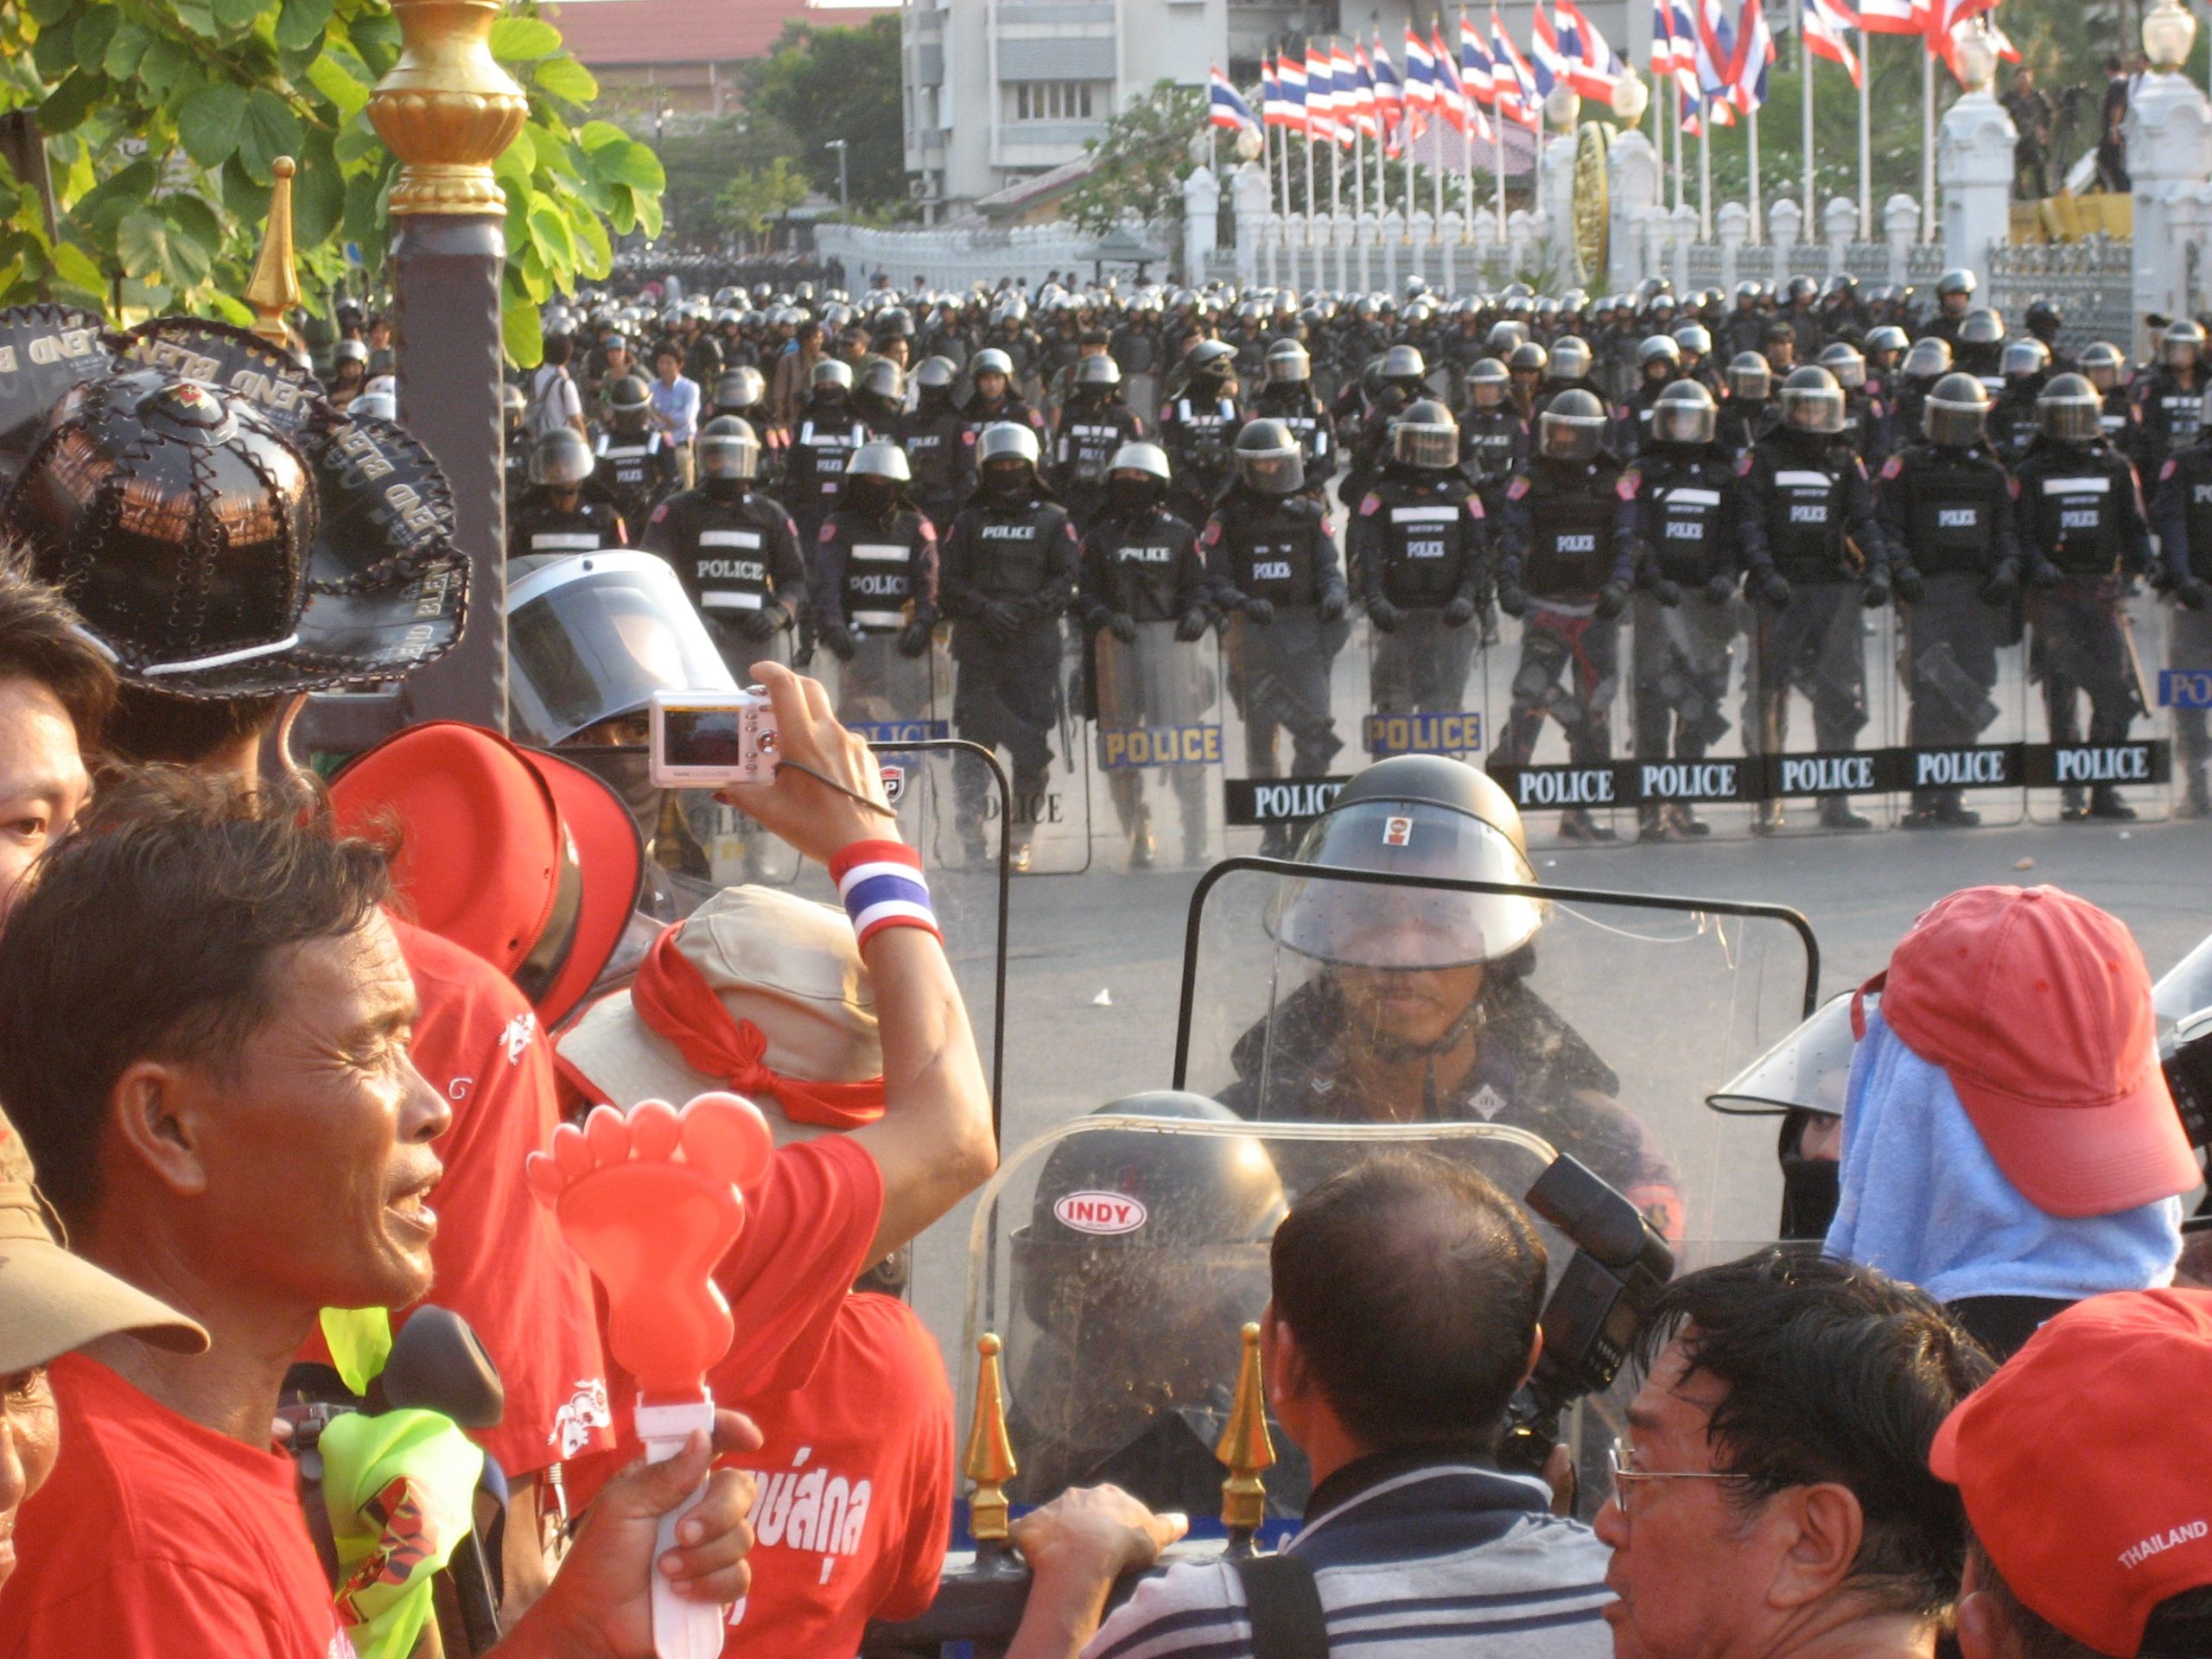 Thailand: It’s young people against the military dictatorship